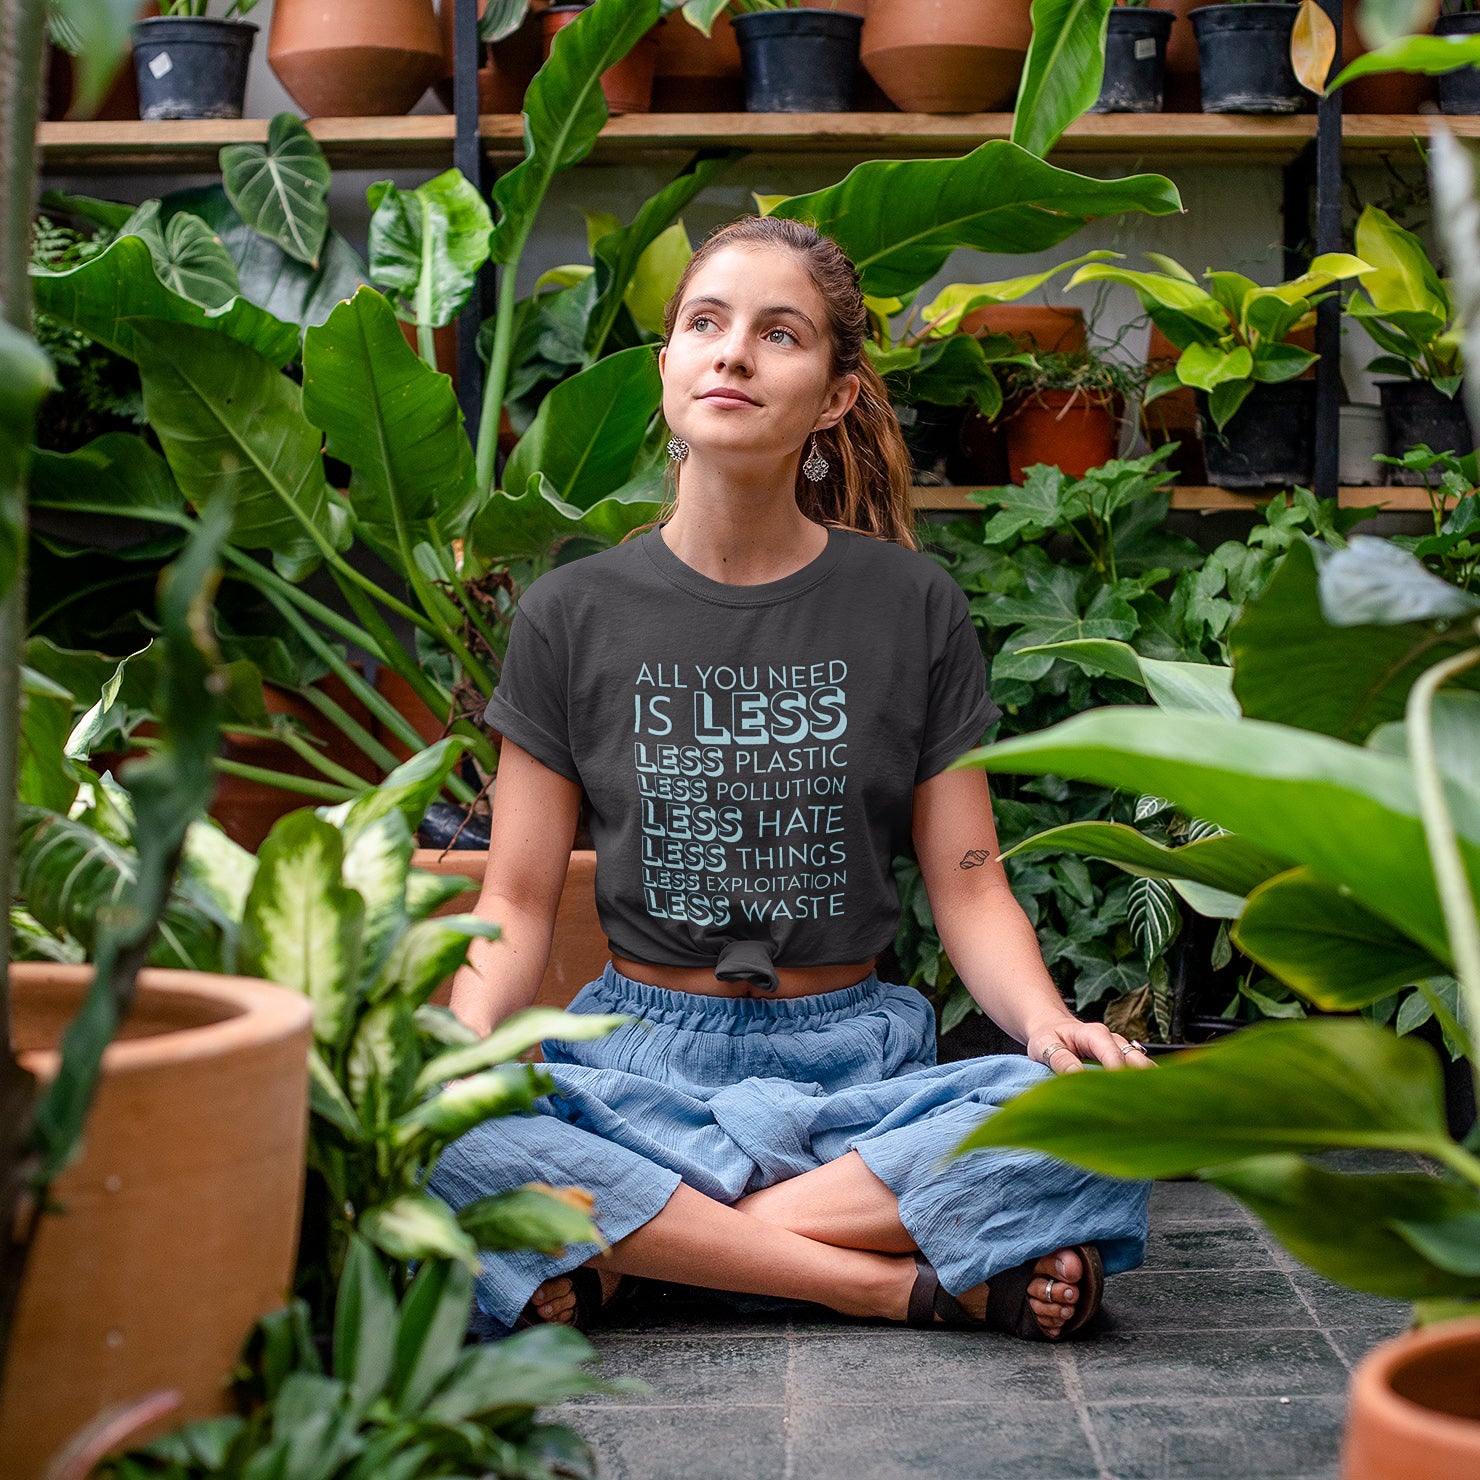 girl in greenhouse surrounded by plants wearing gray architectconstructor "All You Need Is Less" shirt - architectconstructor donated 10% of profits to non-profit organizations - ethically and sustainably made clothing